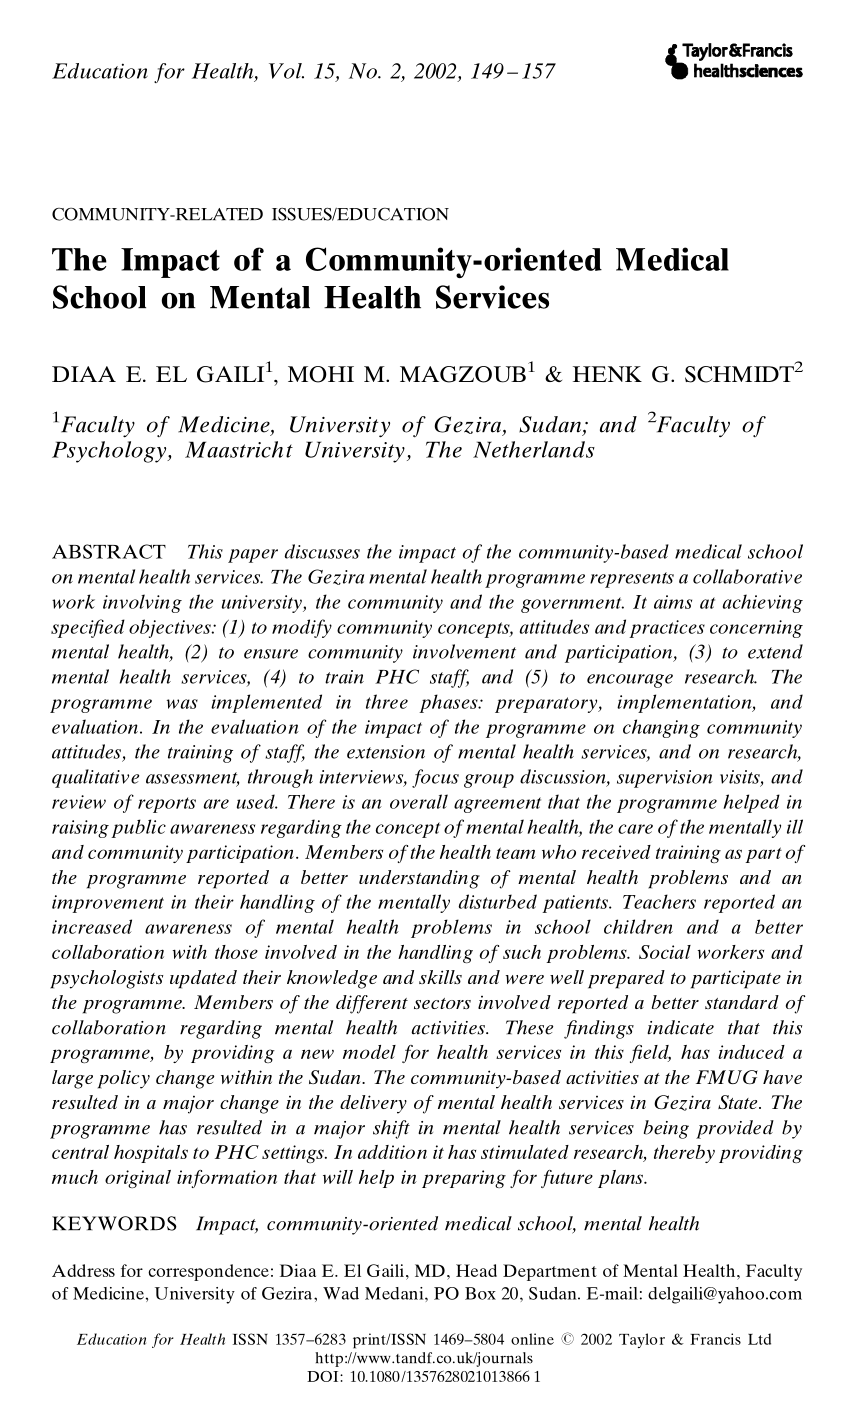 research on mental health services